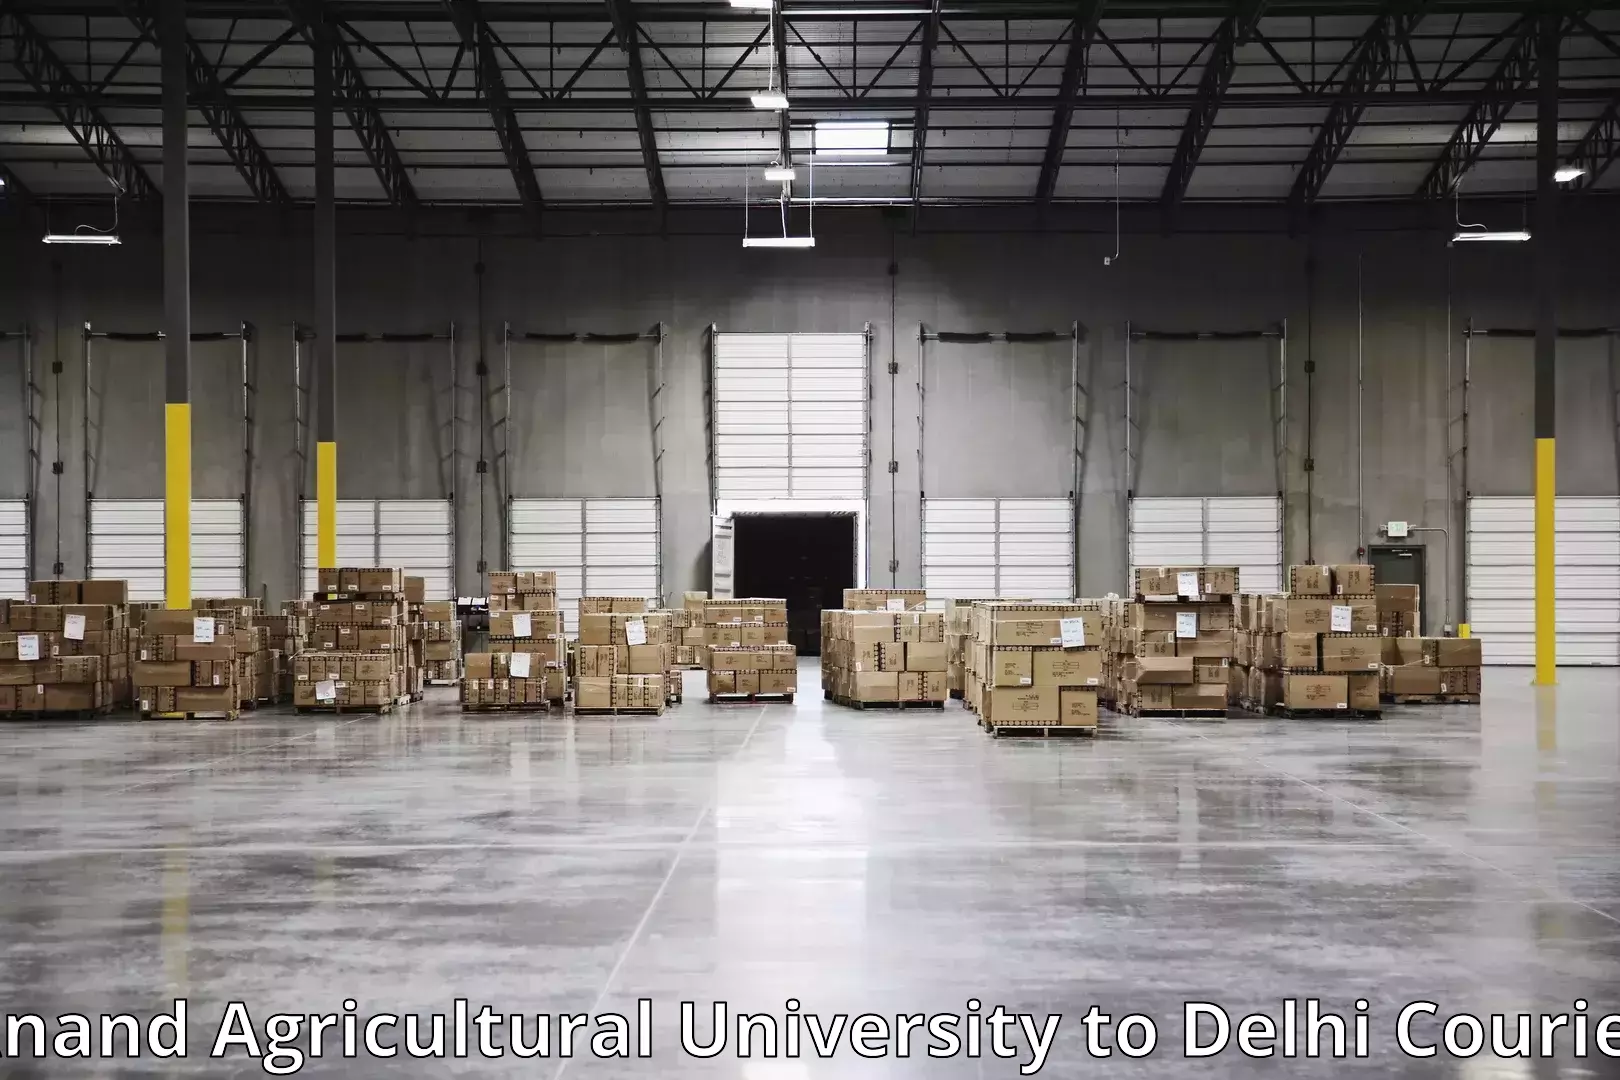 Home moving service Anand Agricultural University to Guru Gobind Singh Indraprastha University New Delhi